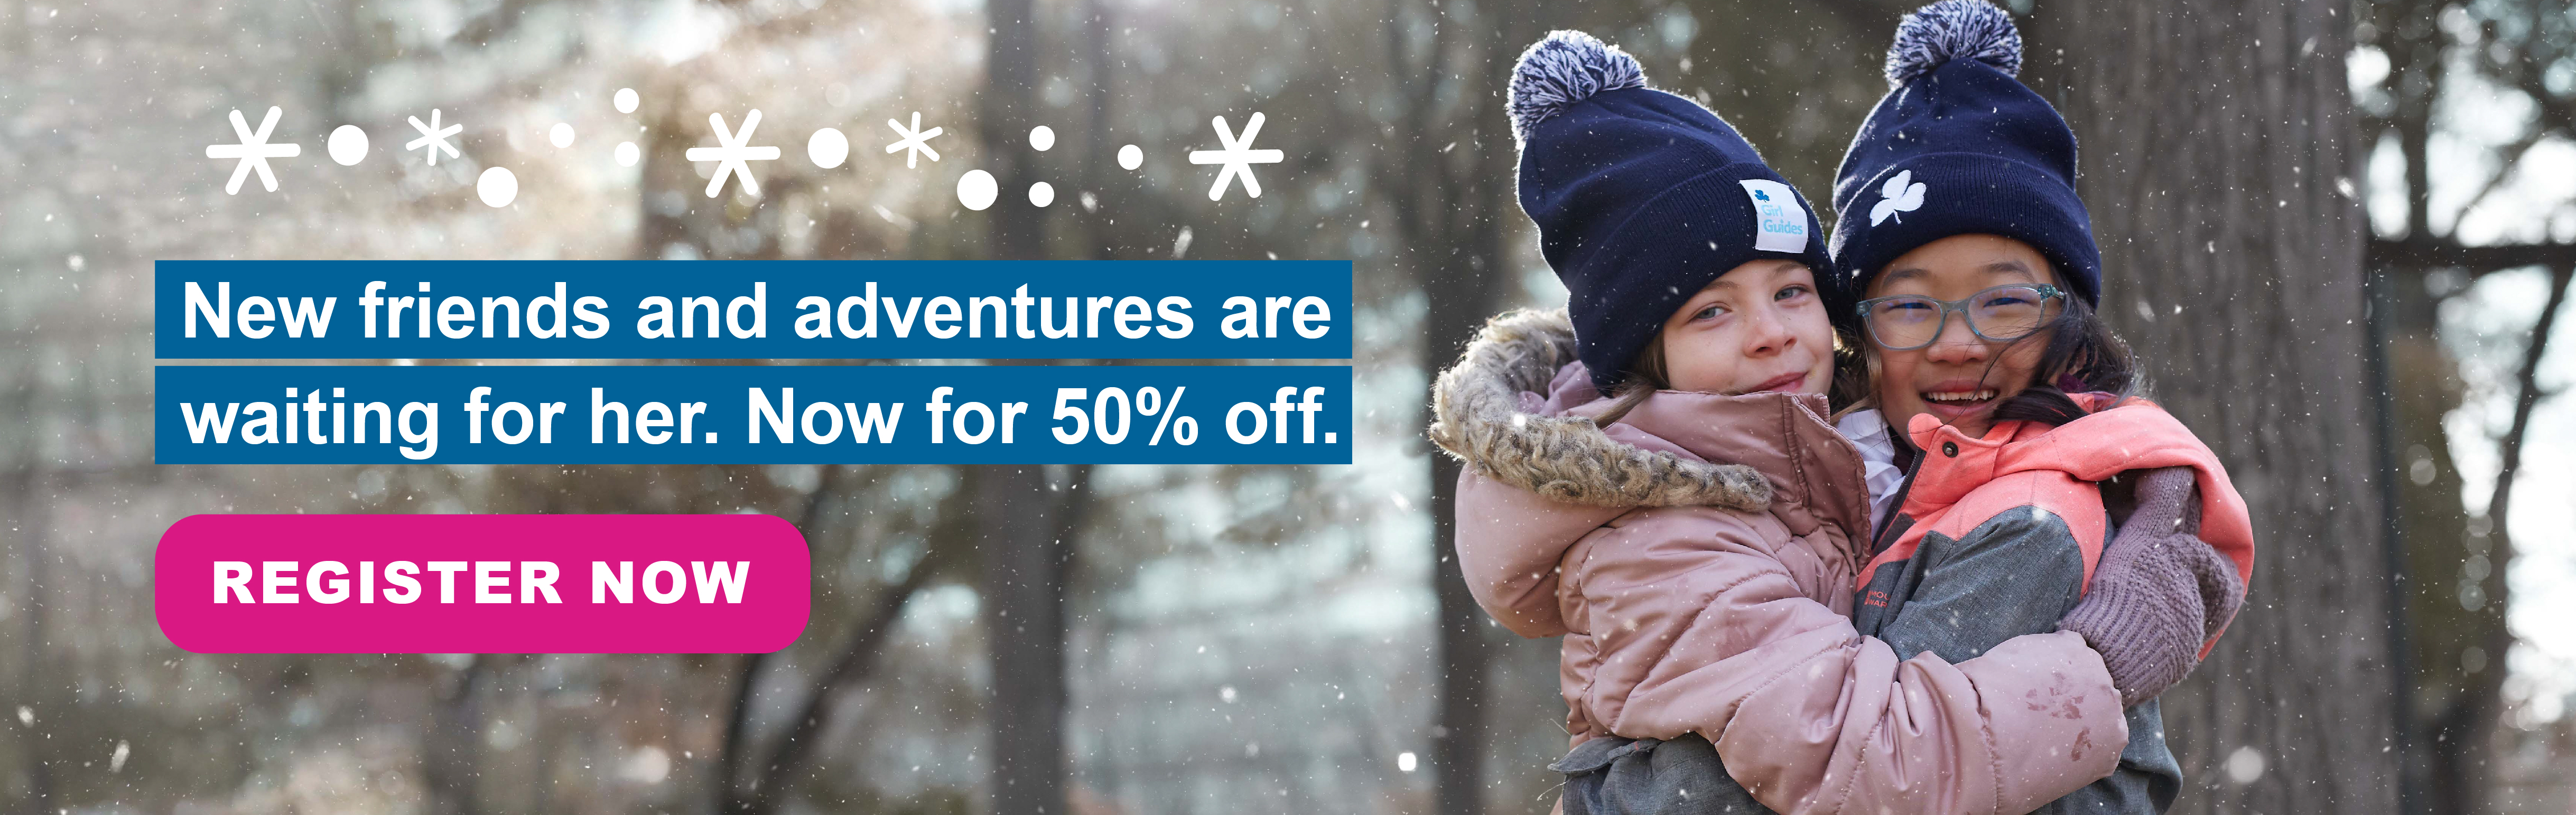 New friends and adventures are waiting for her. Now 50% off